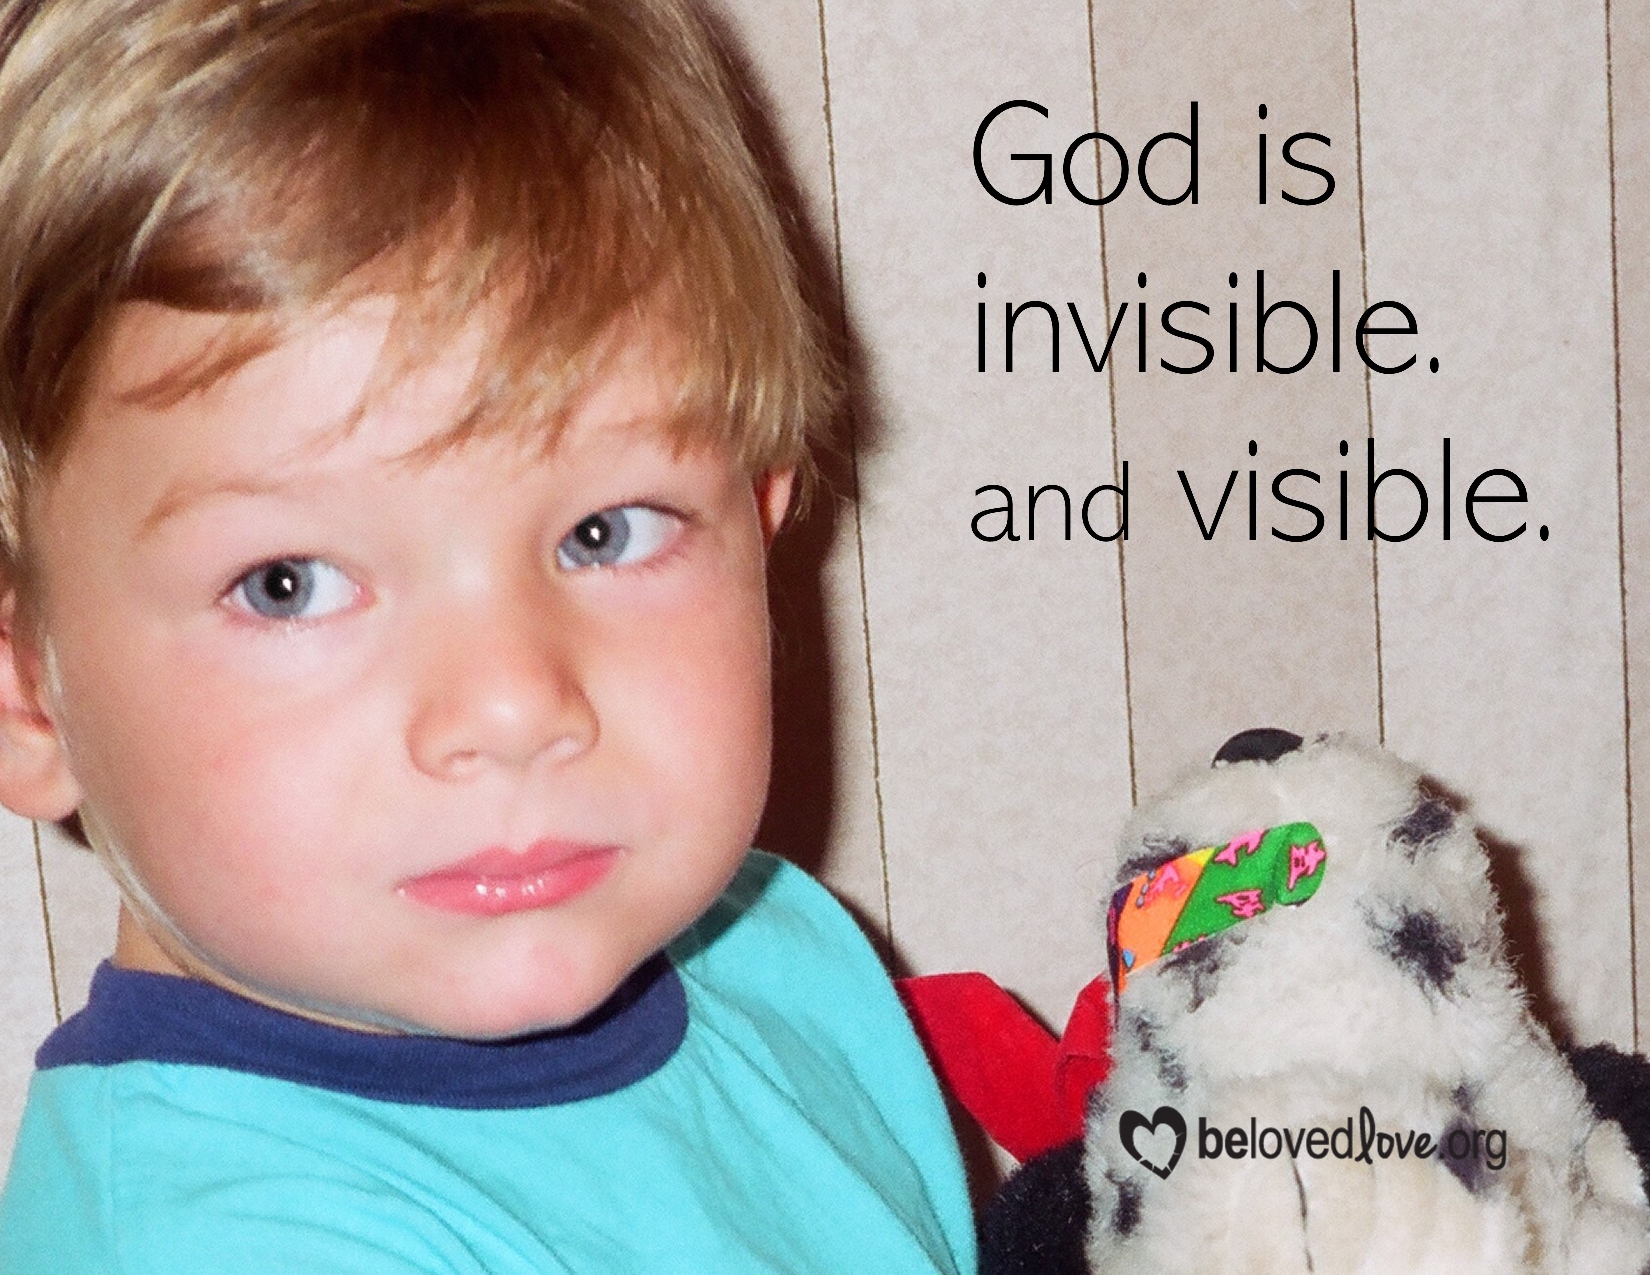 God is Invisible. and visible